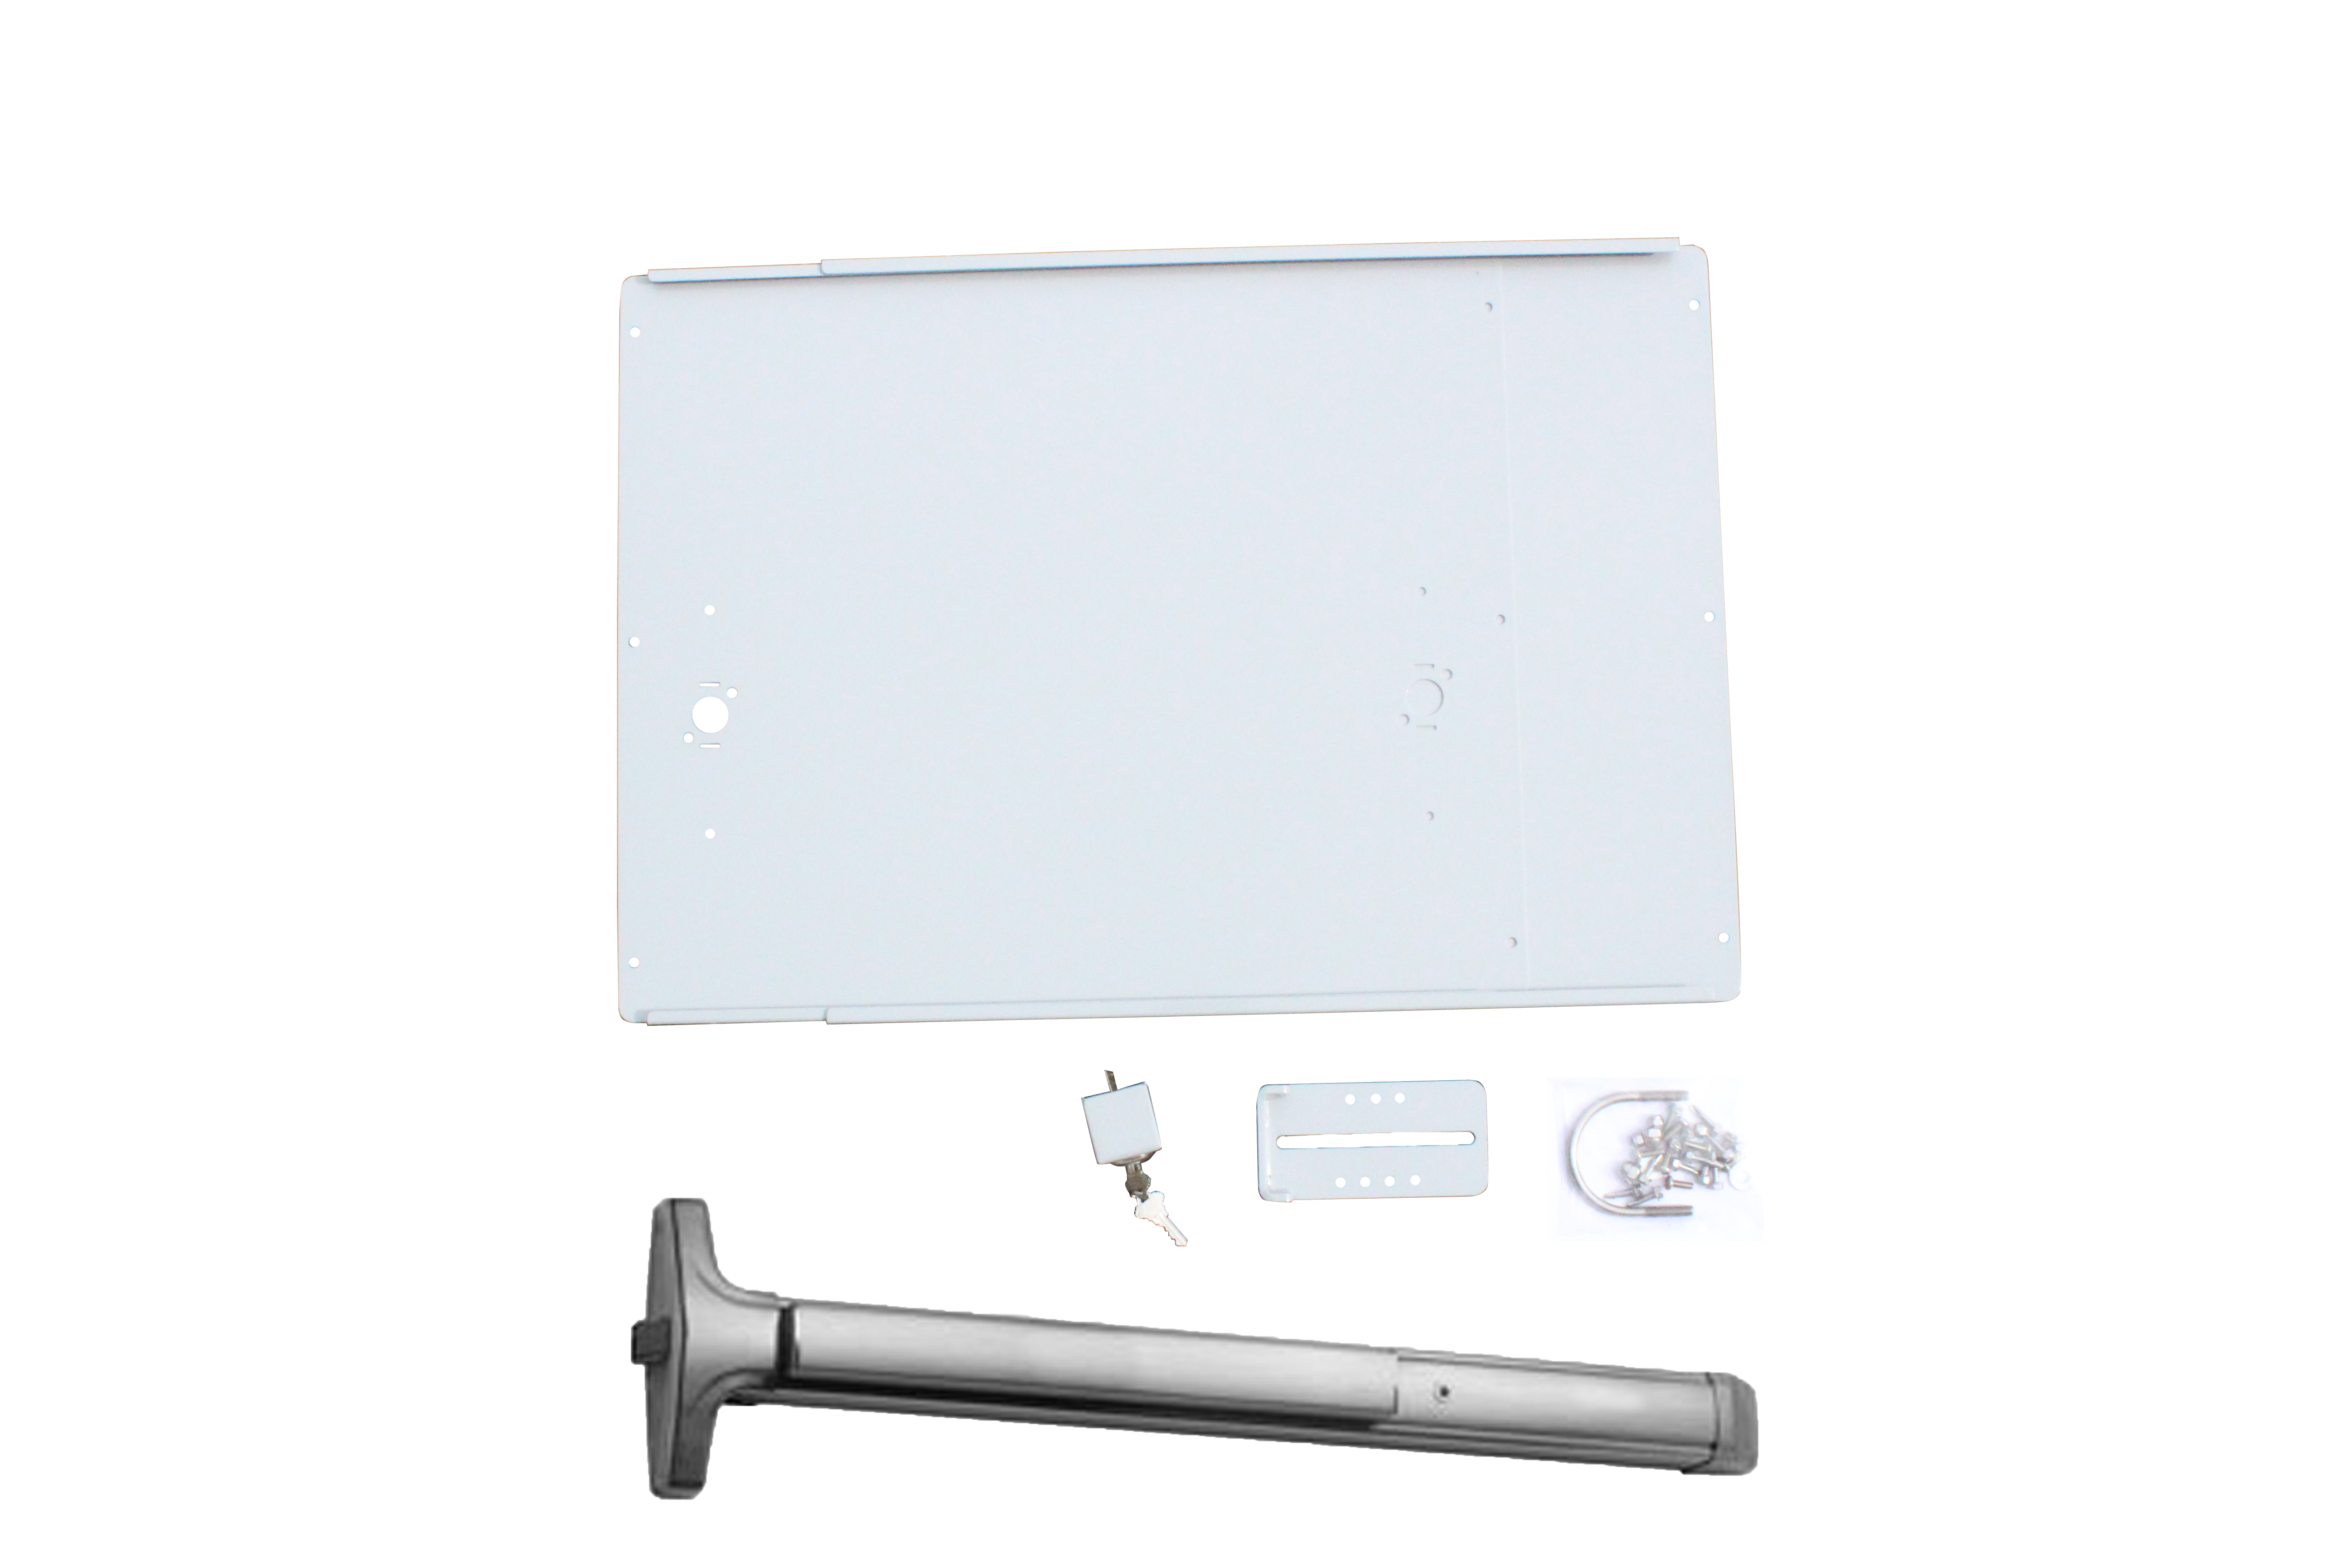 The Premium Exit Bar Kit with the Detex Advantex Stainless Steel Bar is made to be the ultimate solution for your panic exit hardware needs.